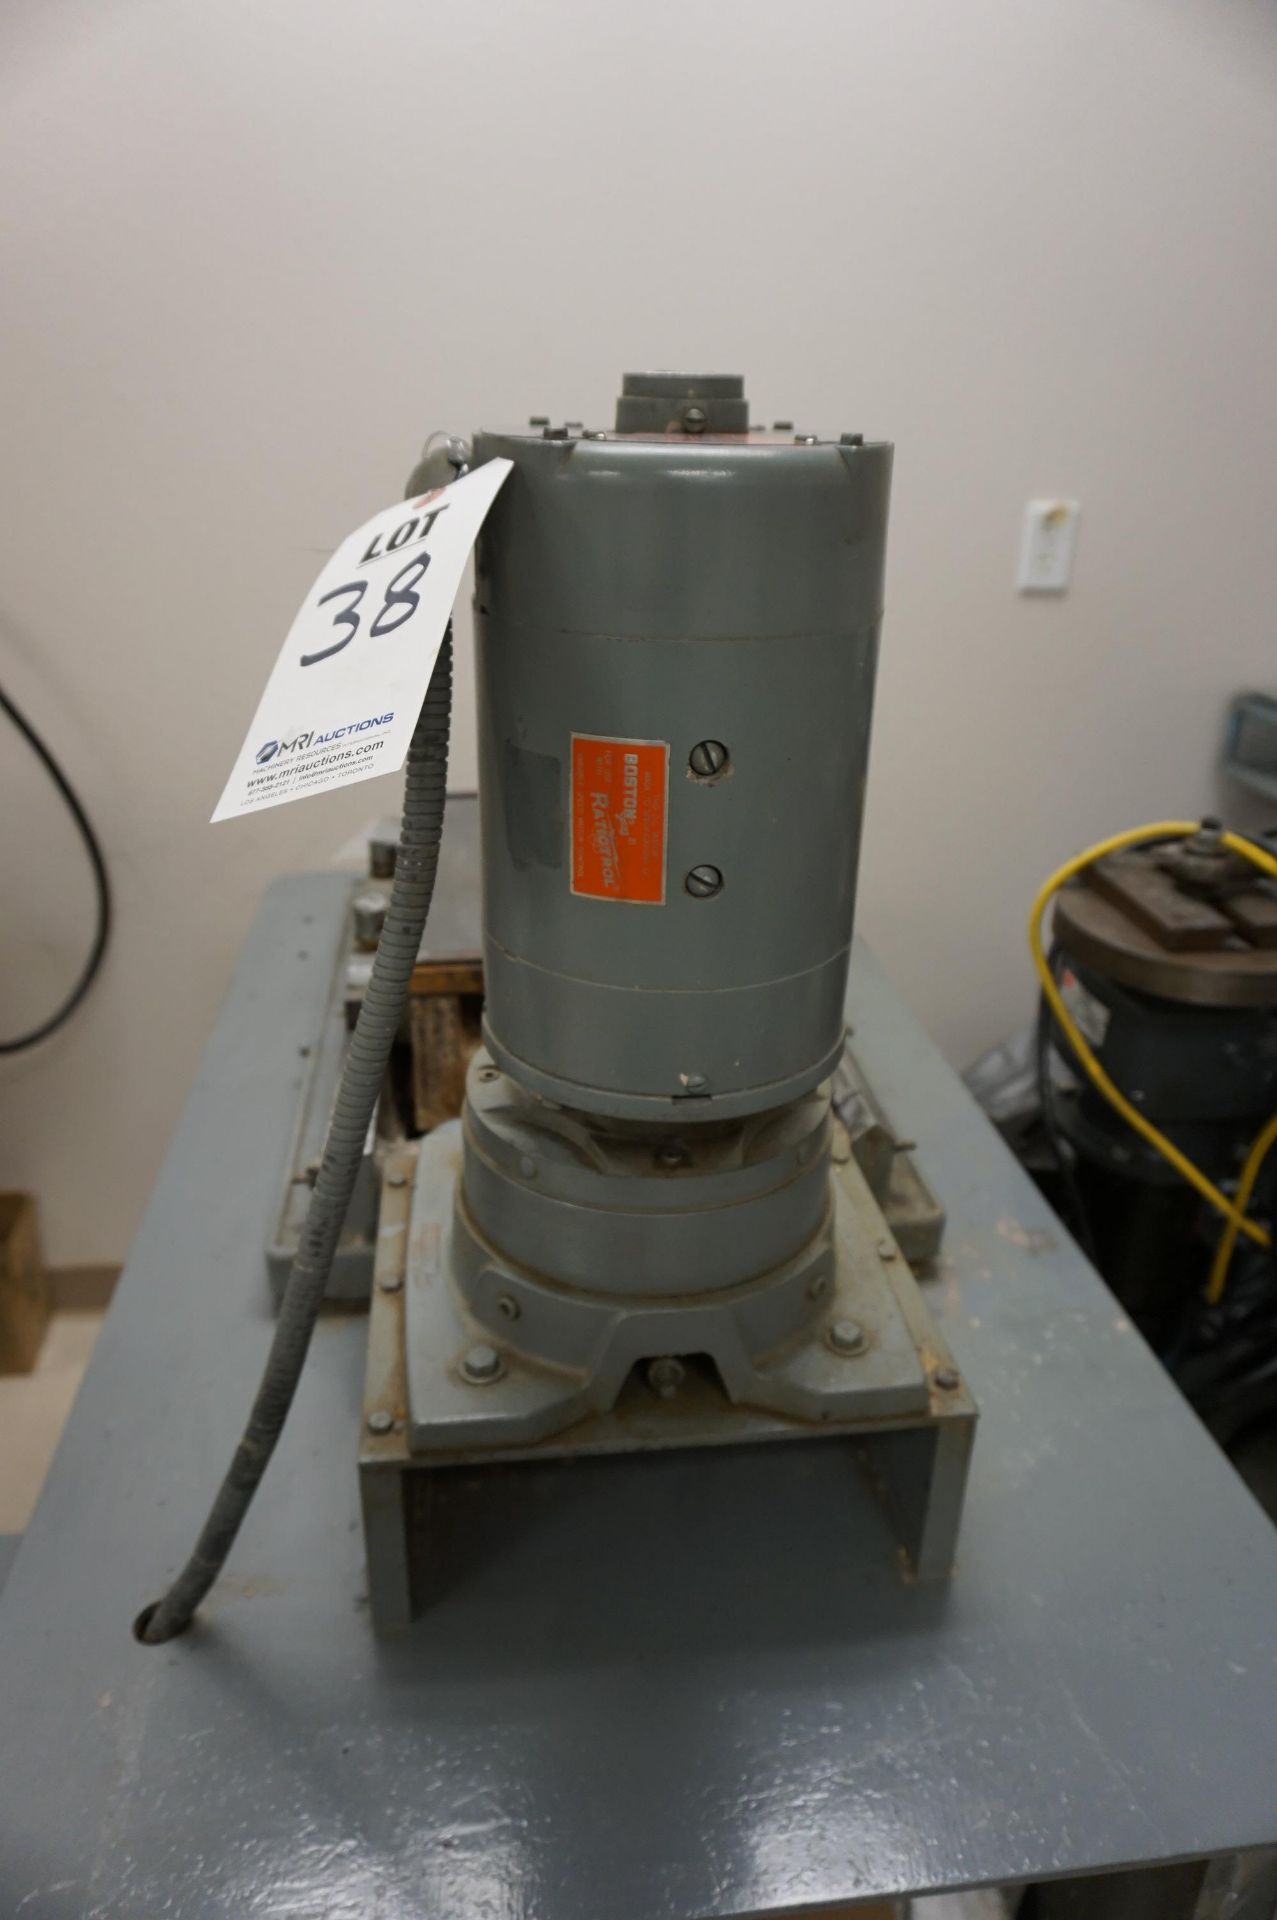 NORTON WAFERING MACHINE, CONVERTED TO XY LAPPING MACHINE, PARTIAL UNIT, MISSING ARM - Image 2 of 5